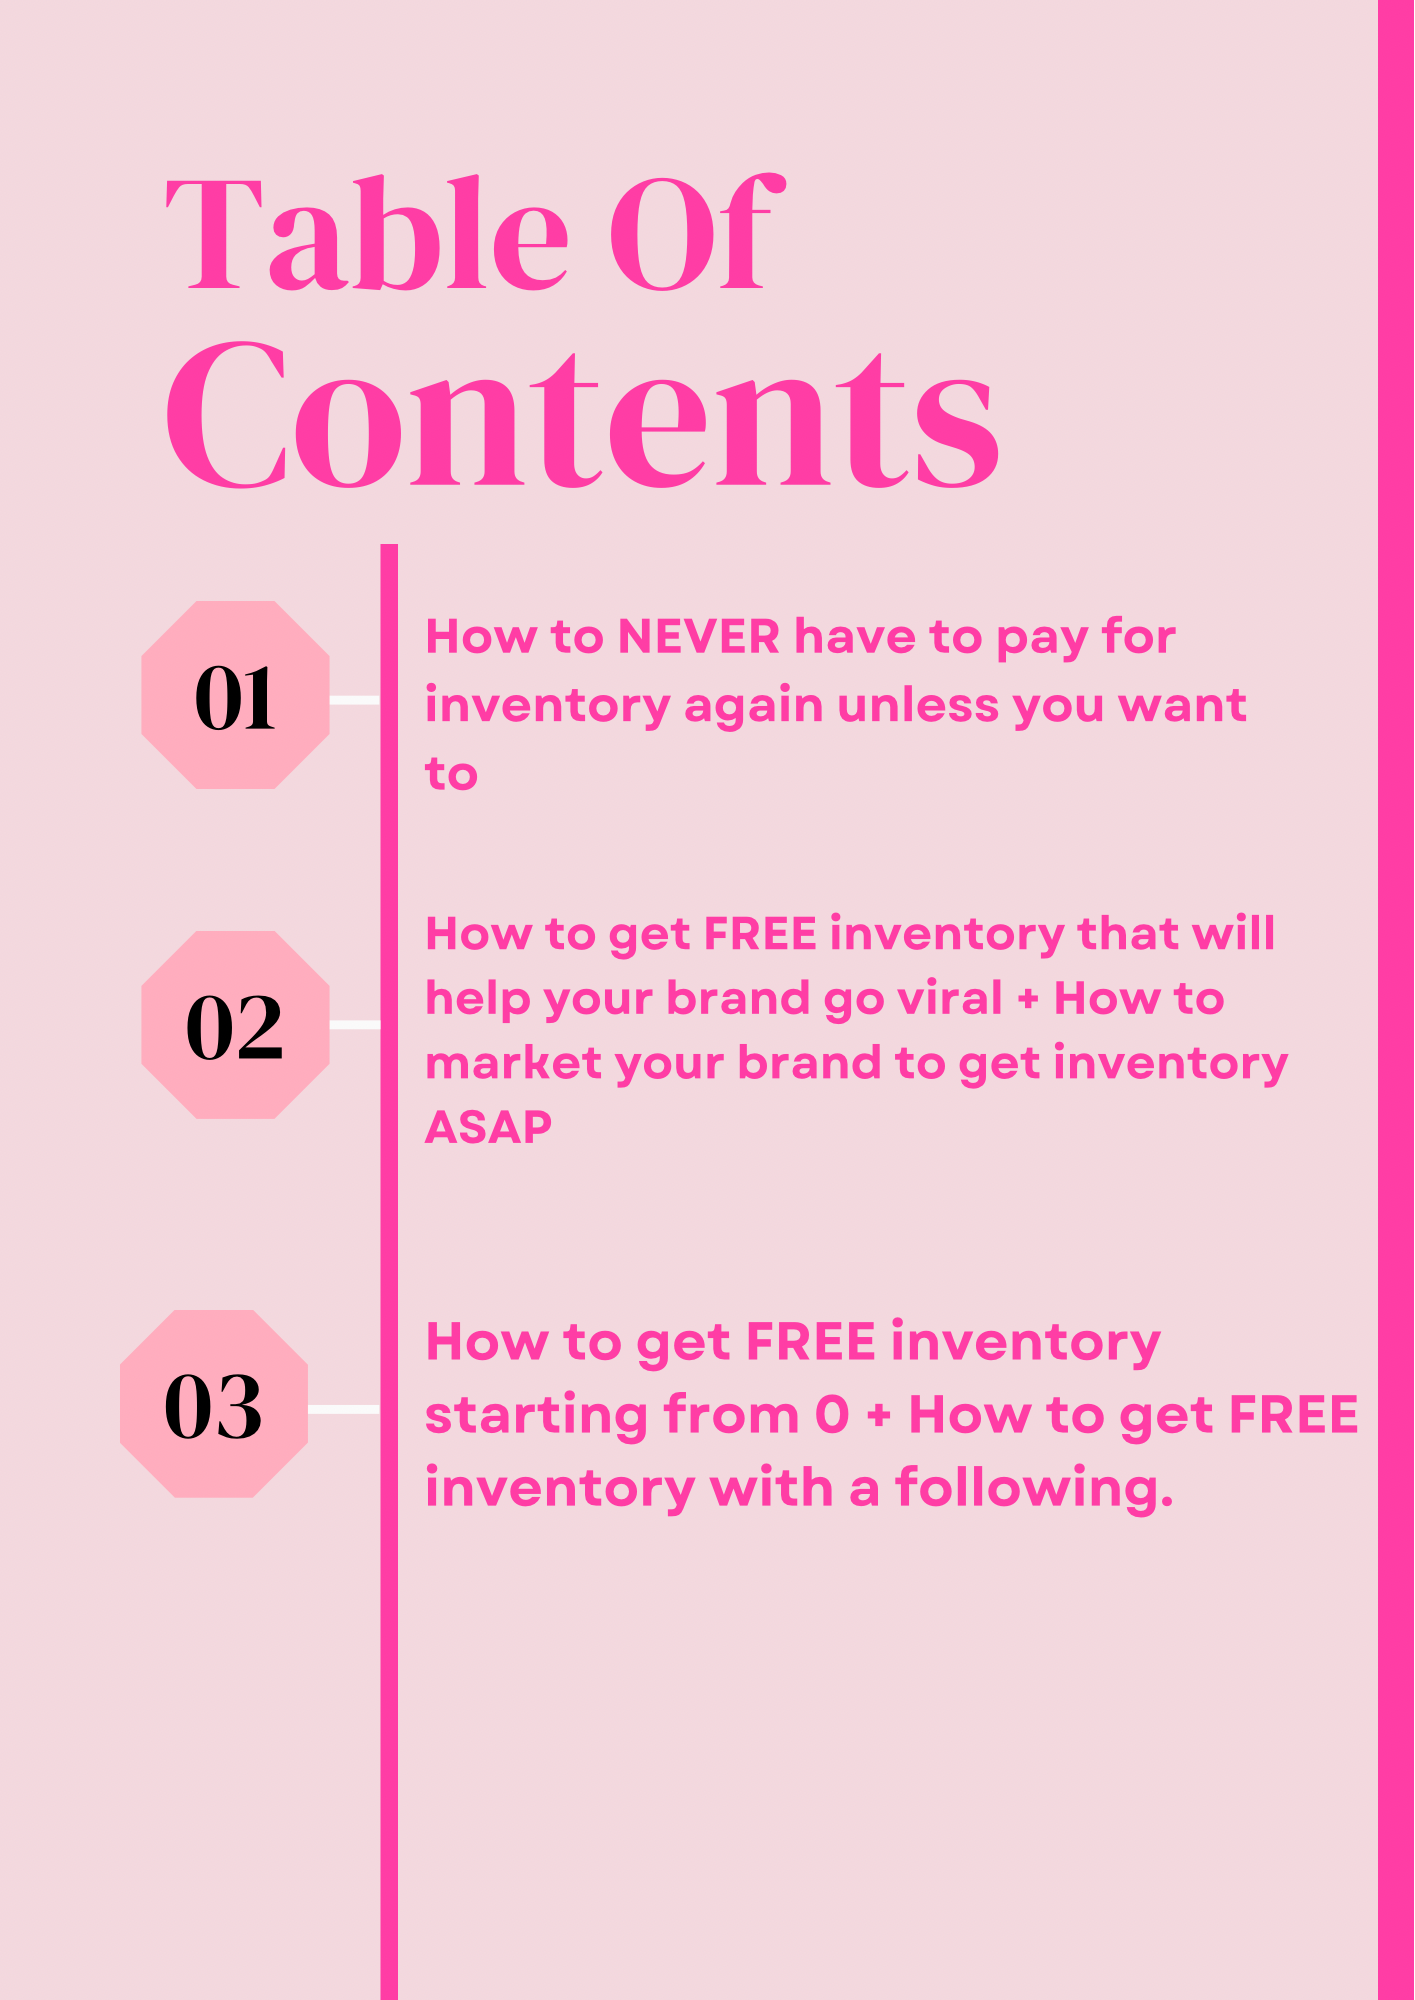 CHEAT CODE: HOW TO NEVER PAY FOR INVENTORY + HOW TO SELL IT! 3 STEP GUIDE📦🔑